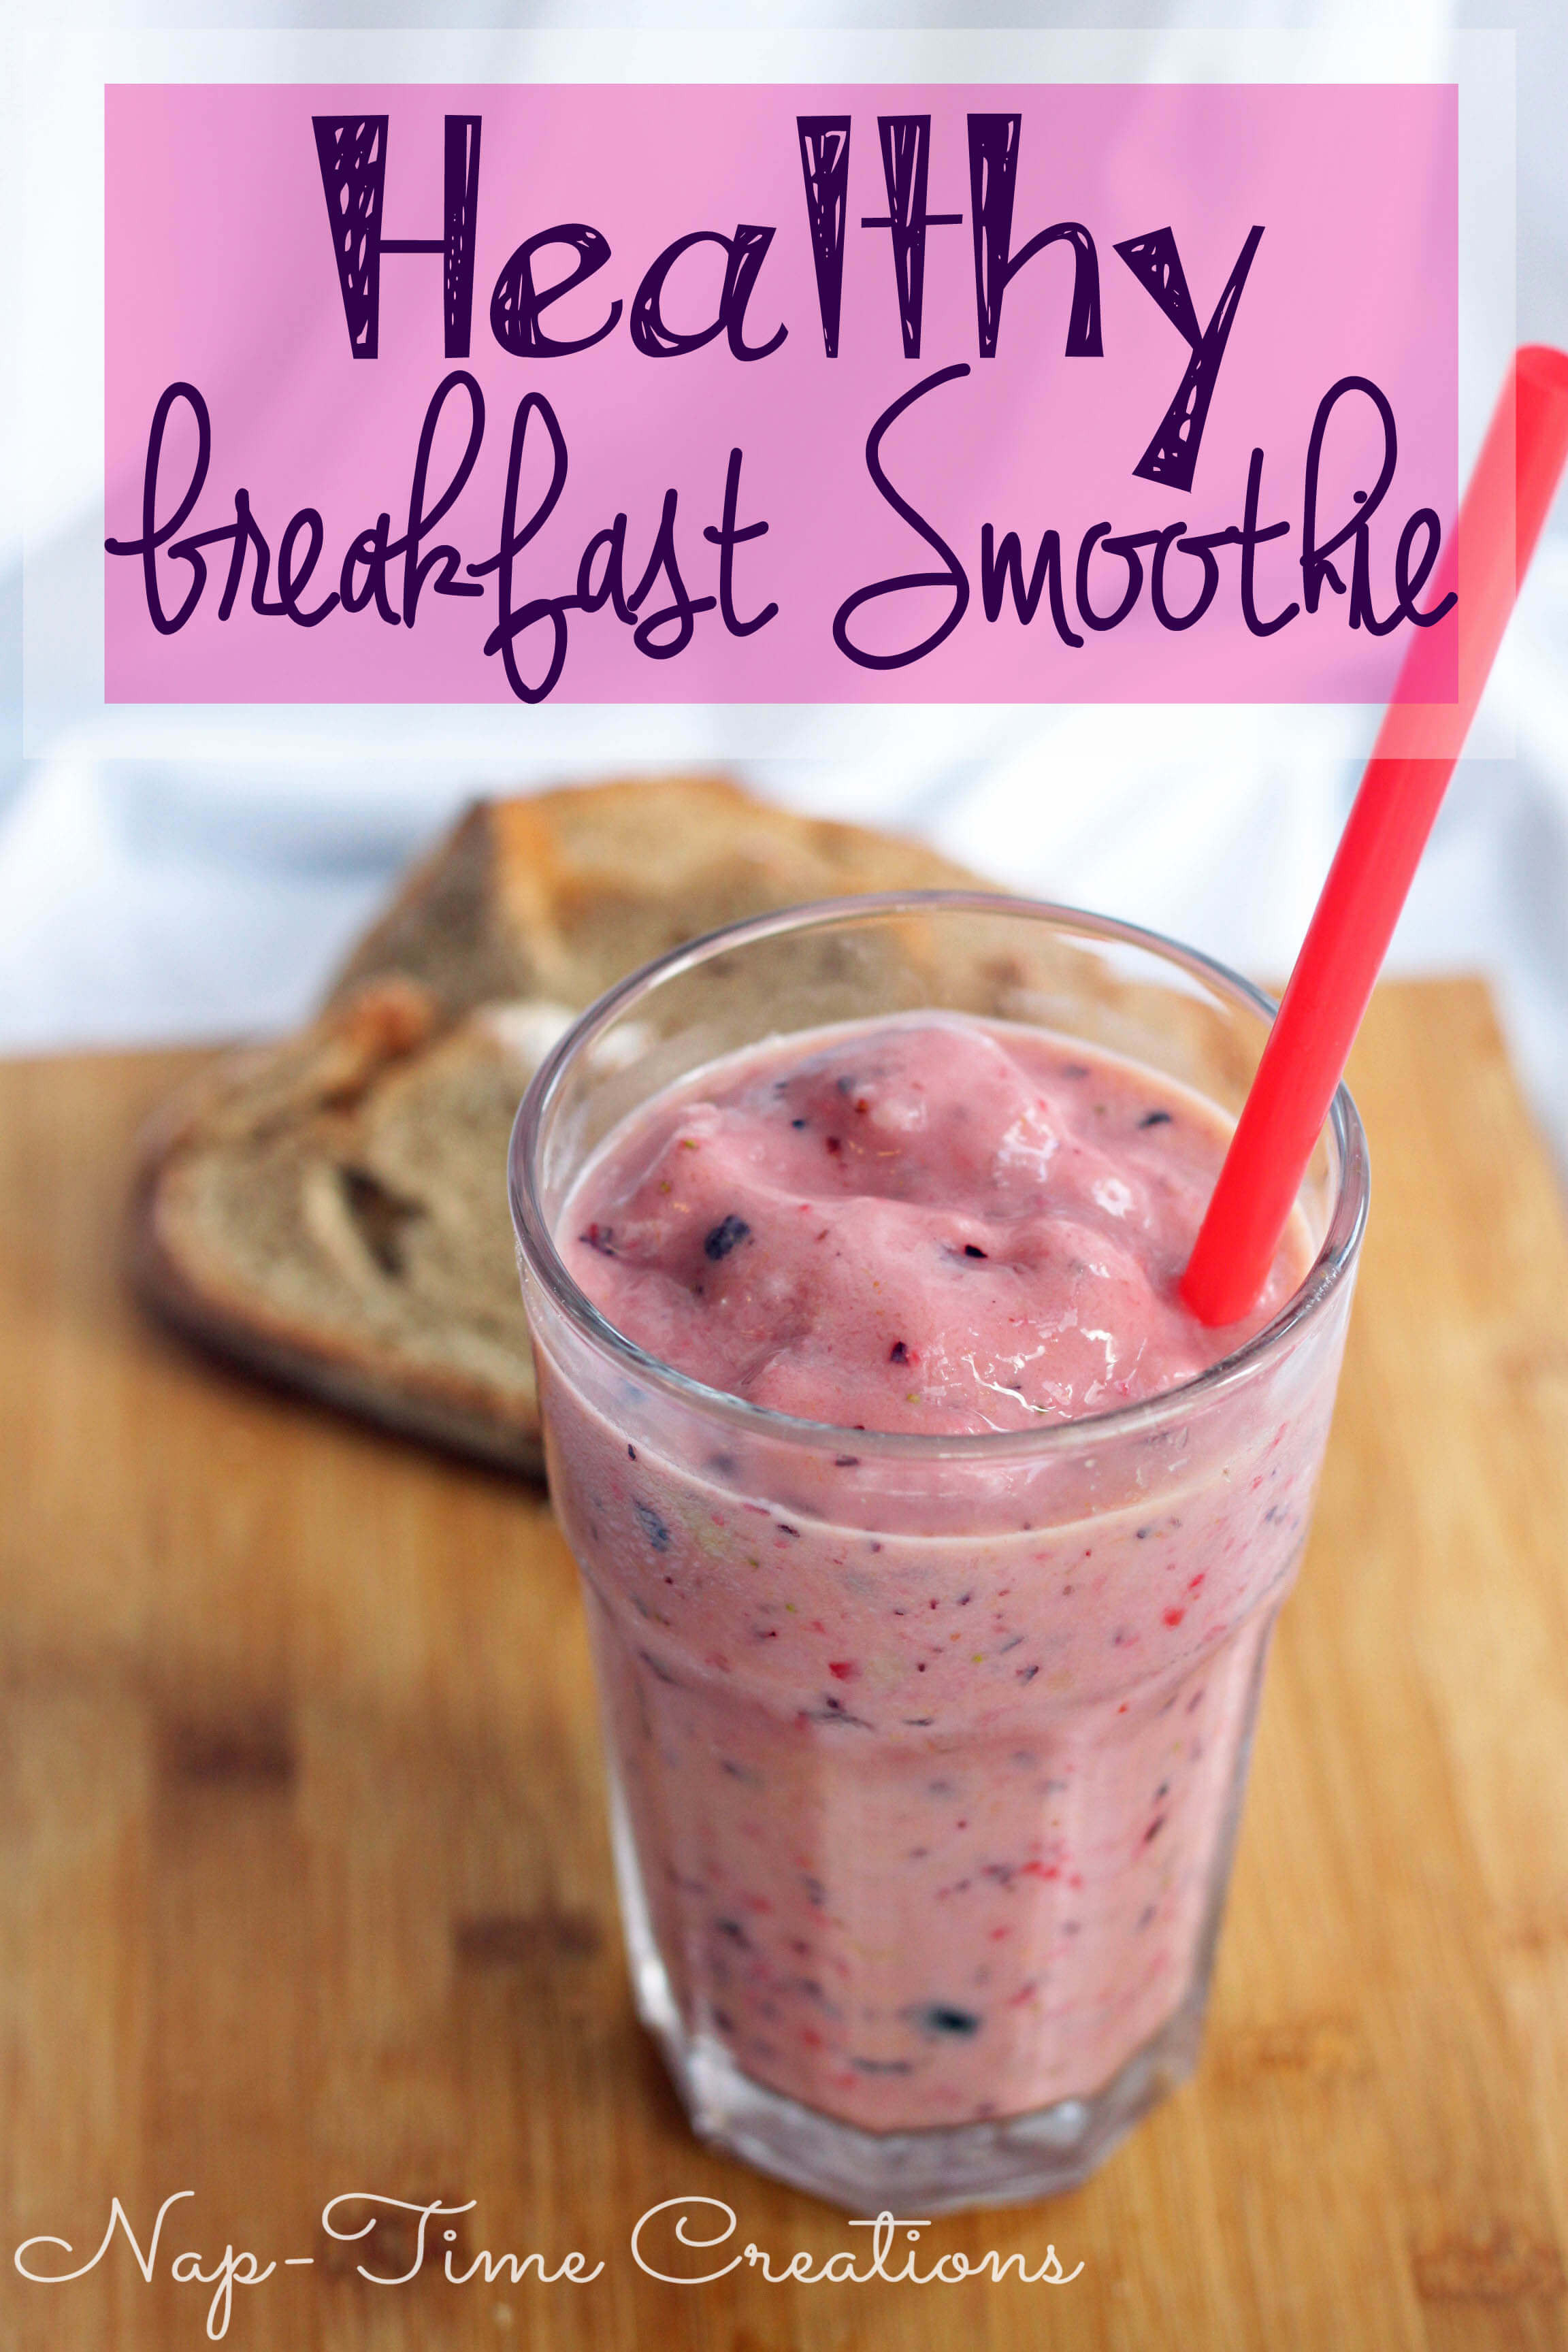 Healthy Smoothie Breakfast
 Healthy Breakfast Smoothie Recipe Nap time Creations